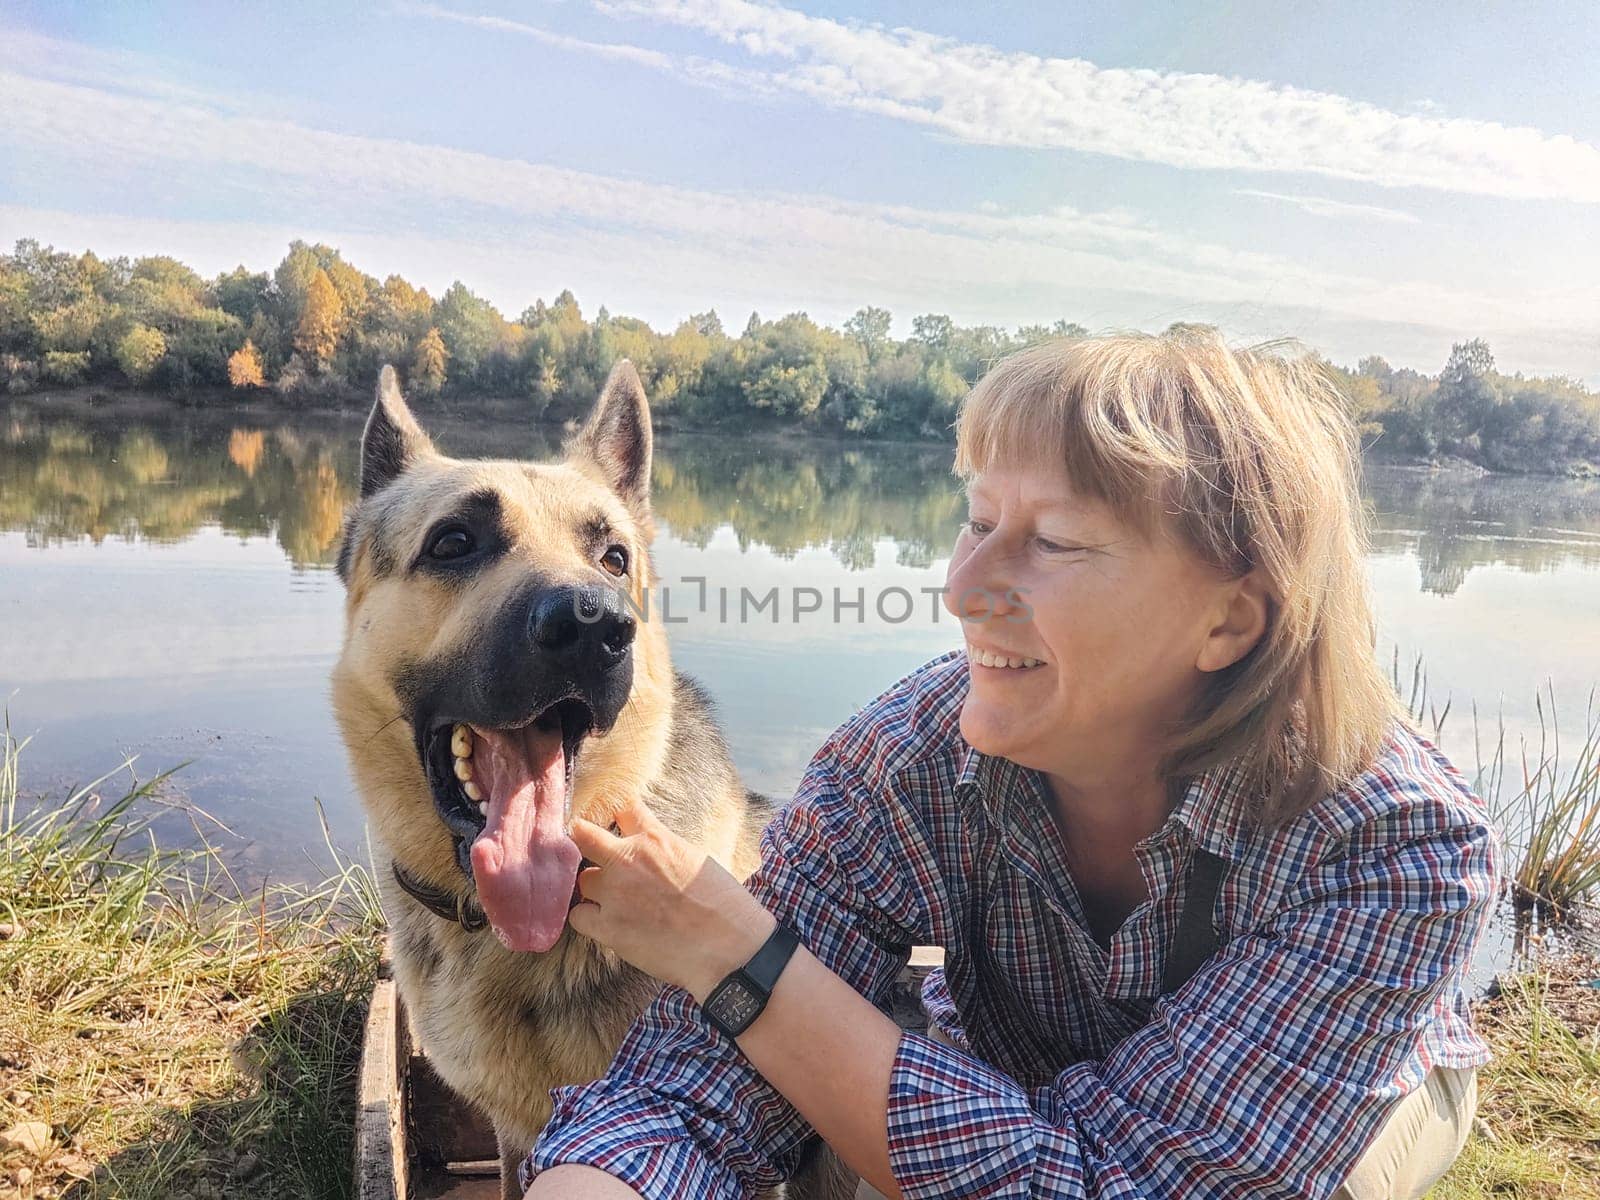 Adult girl with shepherd dog taking selfie near water of river or lake. Middle aged woman and big pet on nature. Friendship, love, fun, hugs by keleny